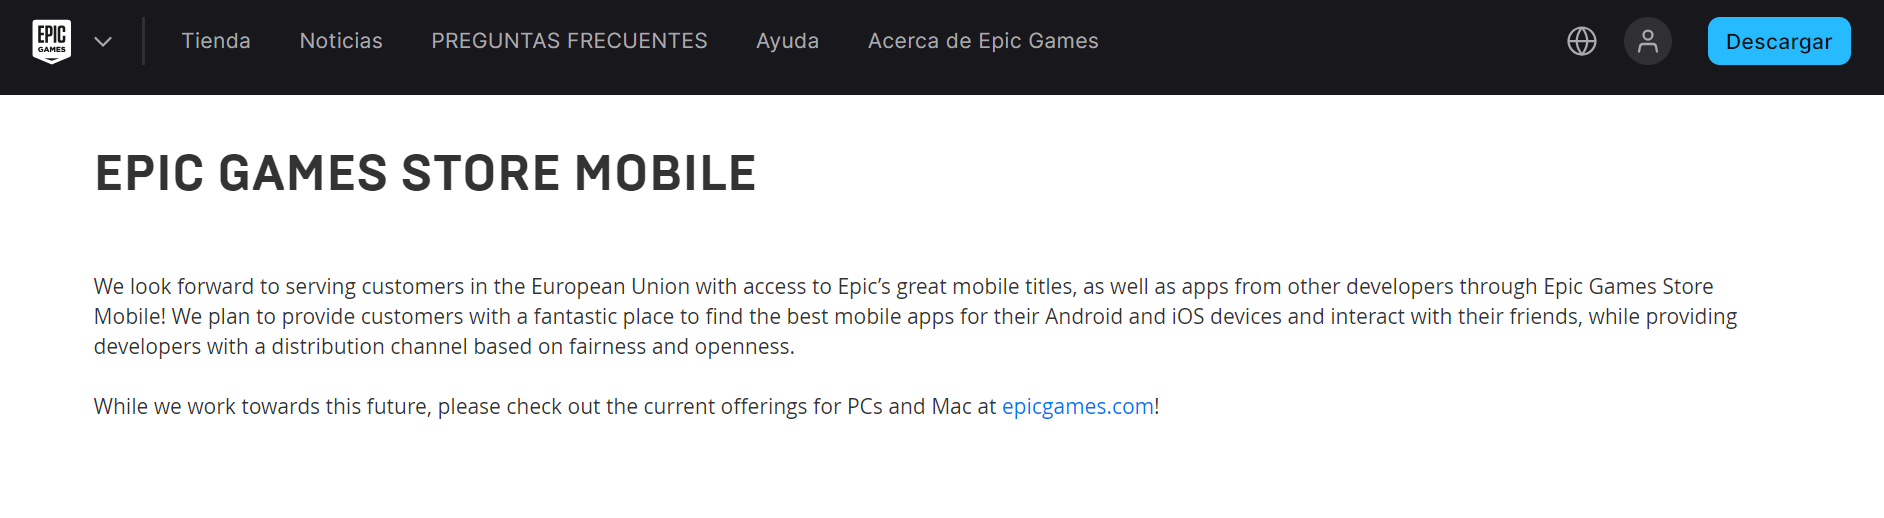 Epic Game Store Mobile for Android